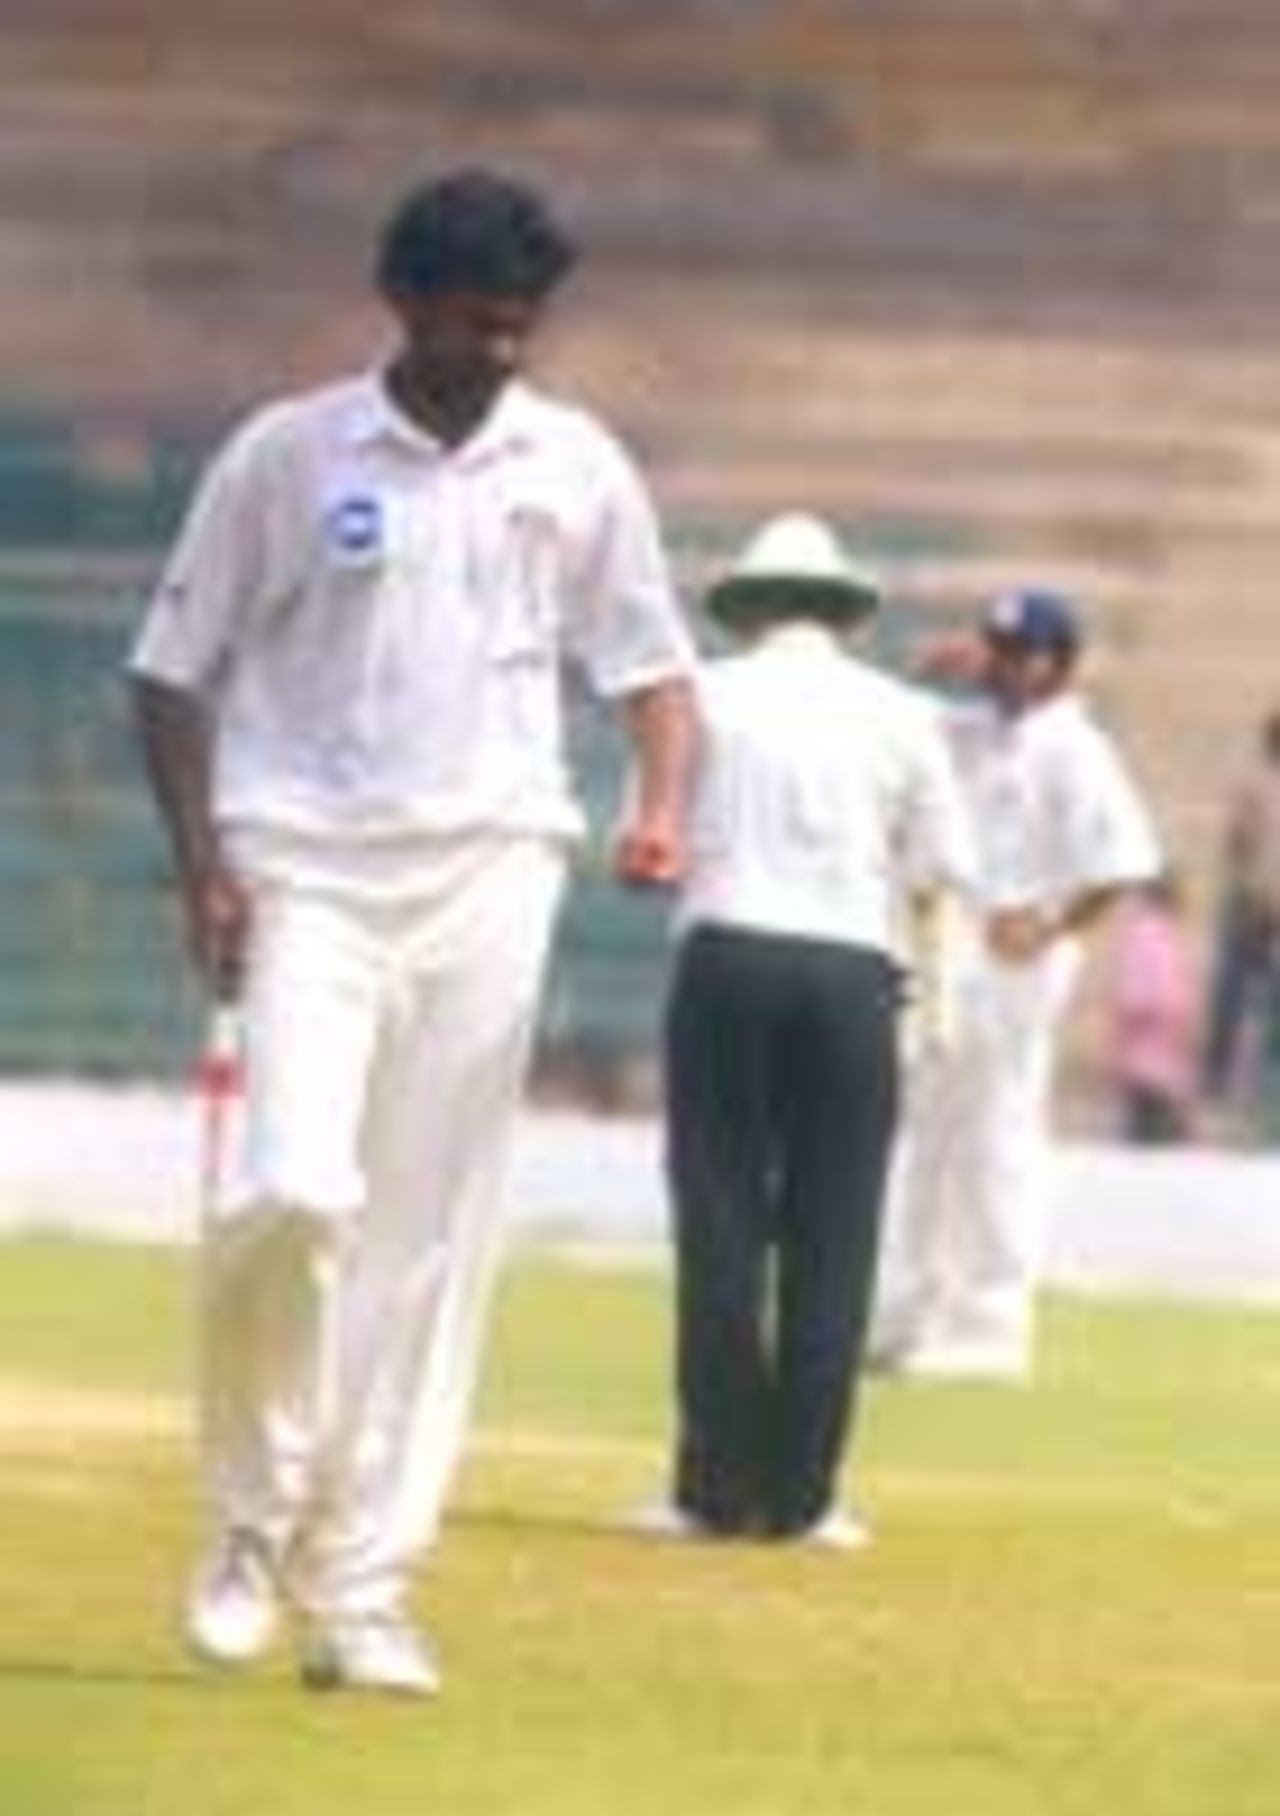 Javagal Srinath who picked up six wickets in the Rest of India innings, Chinnaswamy Stadium, Irani Trophy, 1999-2000, Bangalore